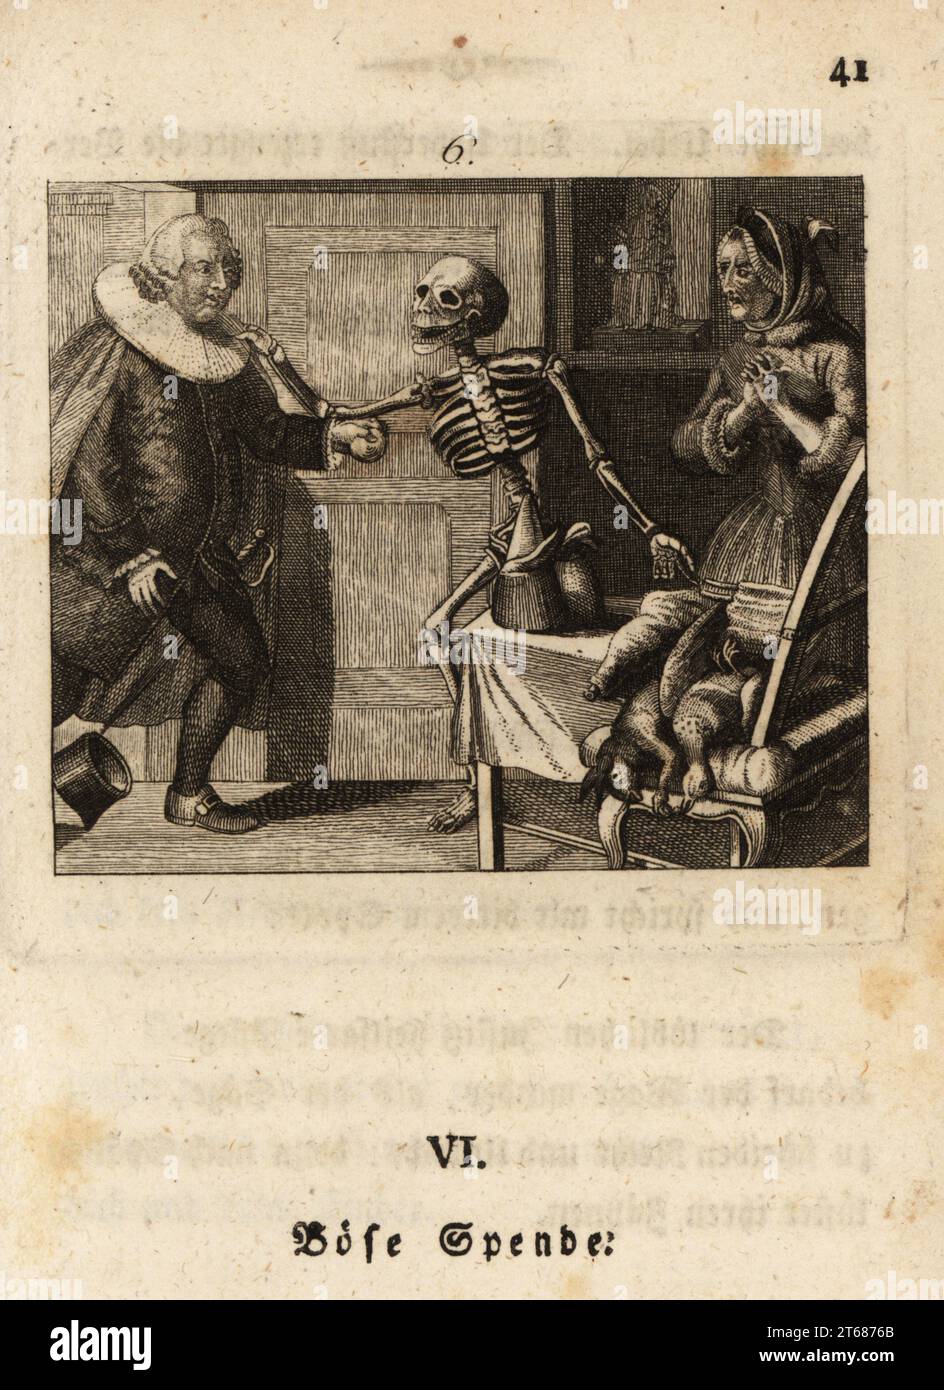 The skeleton of Death, Freund Hans, lays his bony hand on a judges shoulder in his chambers., 18th century. The judge in ruff collar and robes. A servant woman watches in horror. A ham, rabbit and game fowl on the table. The judge. Bose Spende. Copperplate engraving by Johan Georg Mansfeld after an original by Johann Rudolf Schellenberg from Johan Kark Musauss Freund Heins Erscheinungen in Holbeins Manier, (Apparitions of Death in the manner of Holbein) Mannheim, 1803. Stock Photo